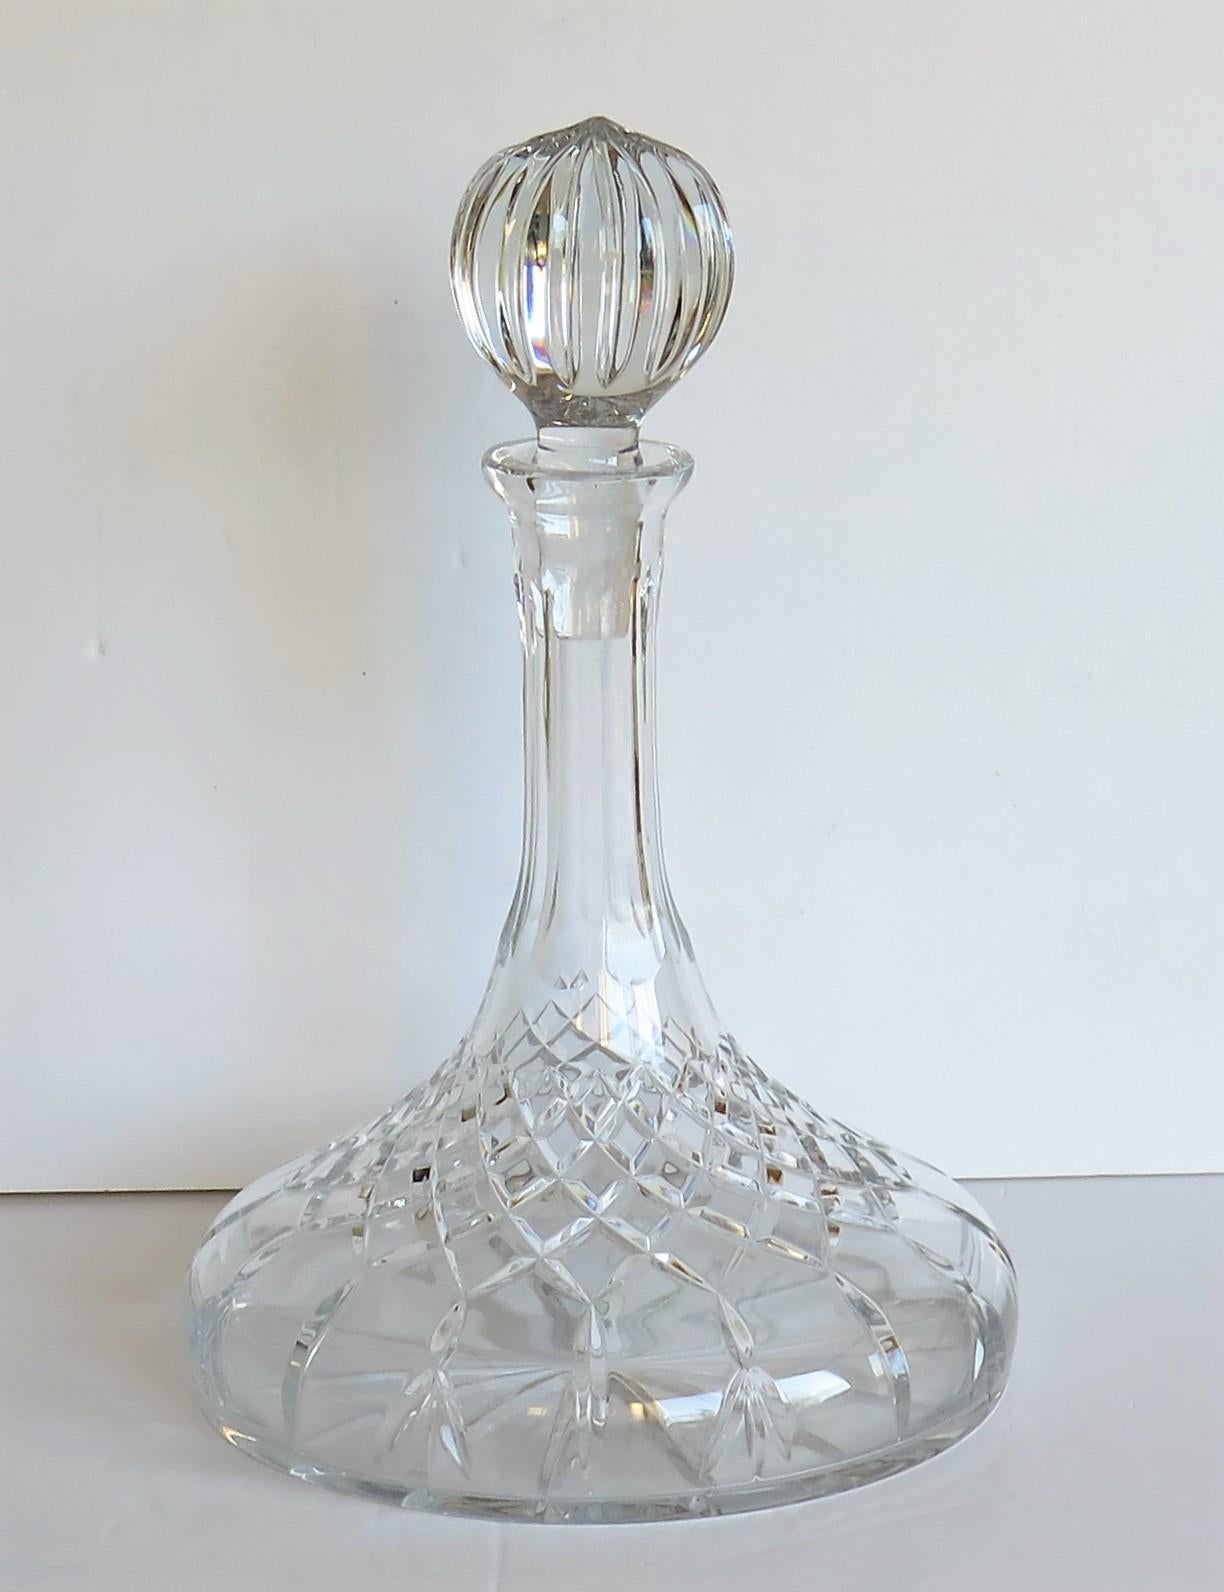 This is a large (over 1.2 litre) high quality ship's decanter with a wide base made from heavy lead crystal or cut-glass having a soft light grey color.

The decanter is well cut with a cross cut lower half with graduated diamonds and vertical